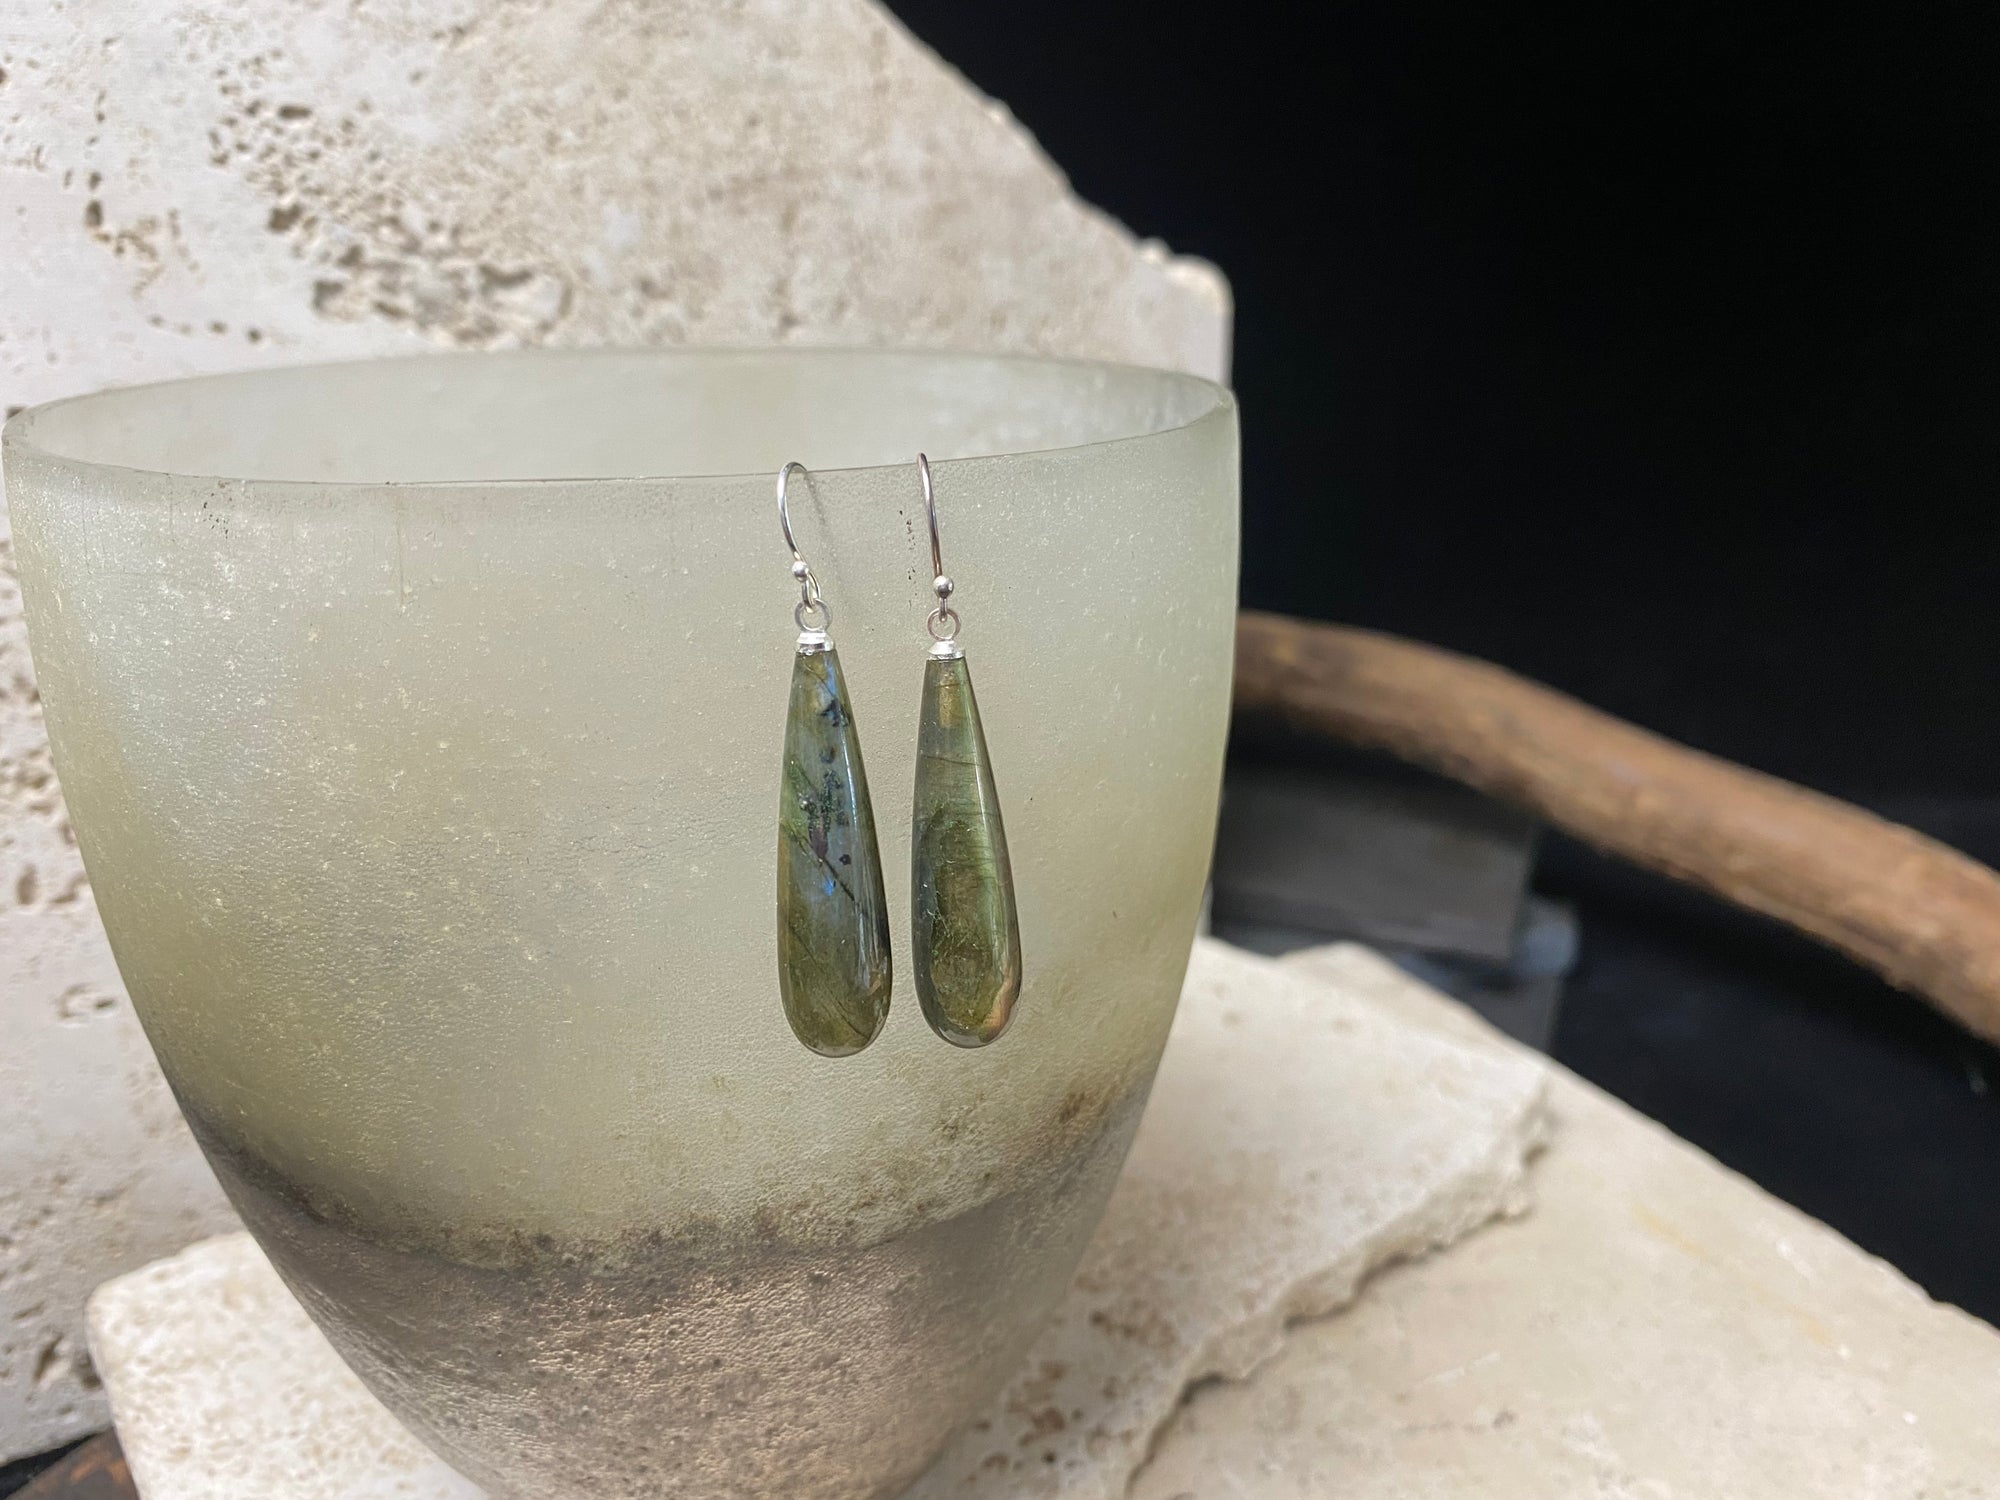 Simply elegant labradorite earrings, crafted from natural labradorite stones to show off their stunning lustre and fire. Sterling silver hoops complete the look. Length 4.6 cm